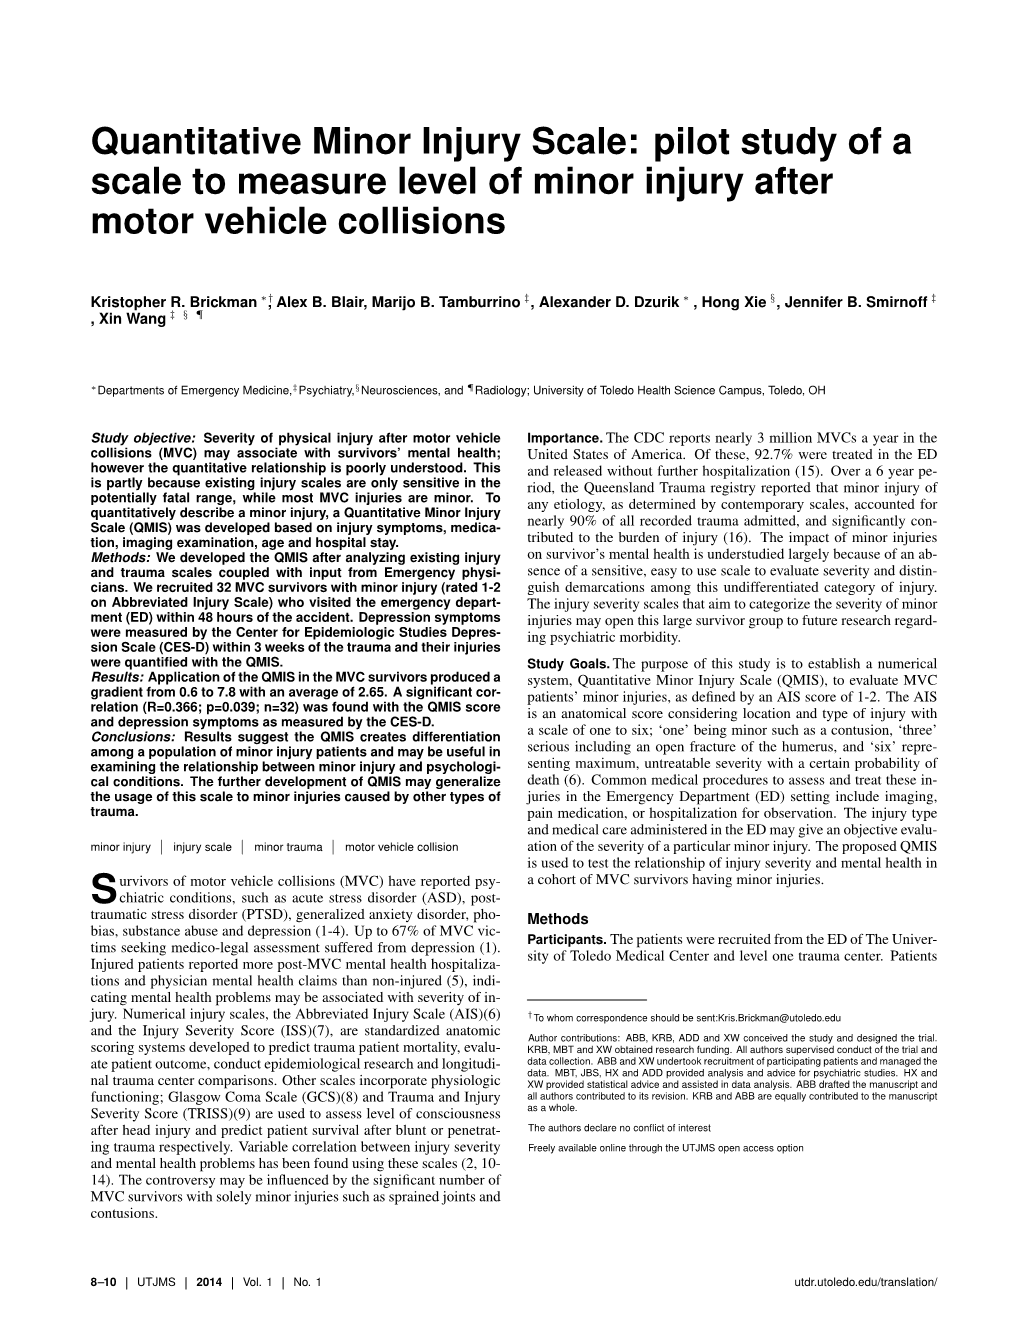 Quantitative Minor Injury Scale: Pilot Study of a Scale to Measure Level of Minor Injury After Motor Vehicle Collisions